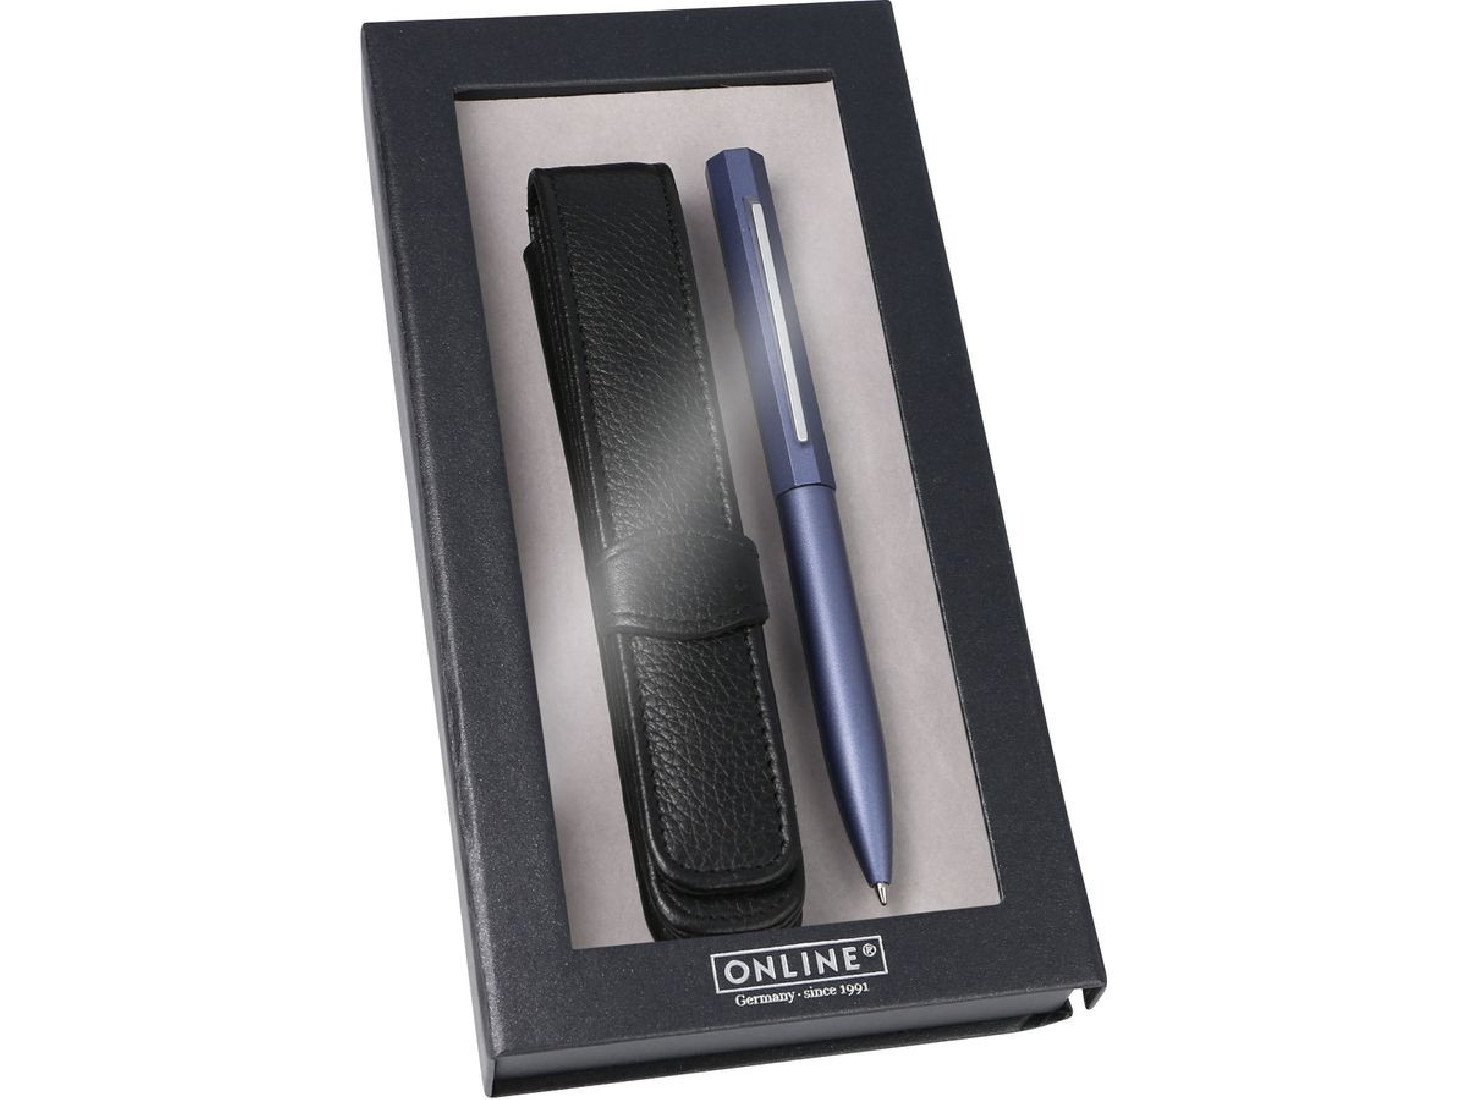 Ballpen Metal Octopen Blue with leather case 34691 Online